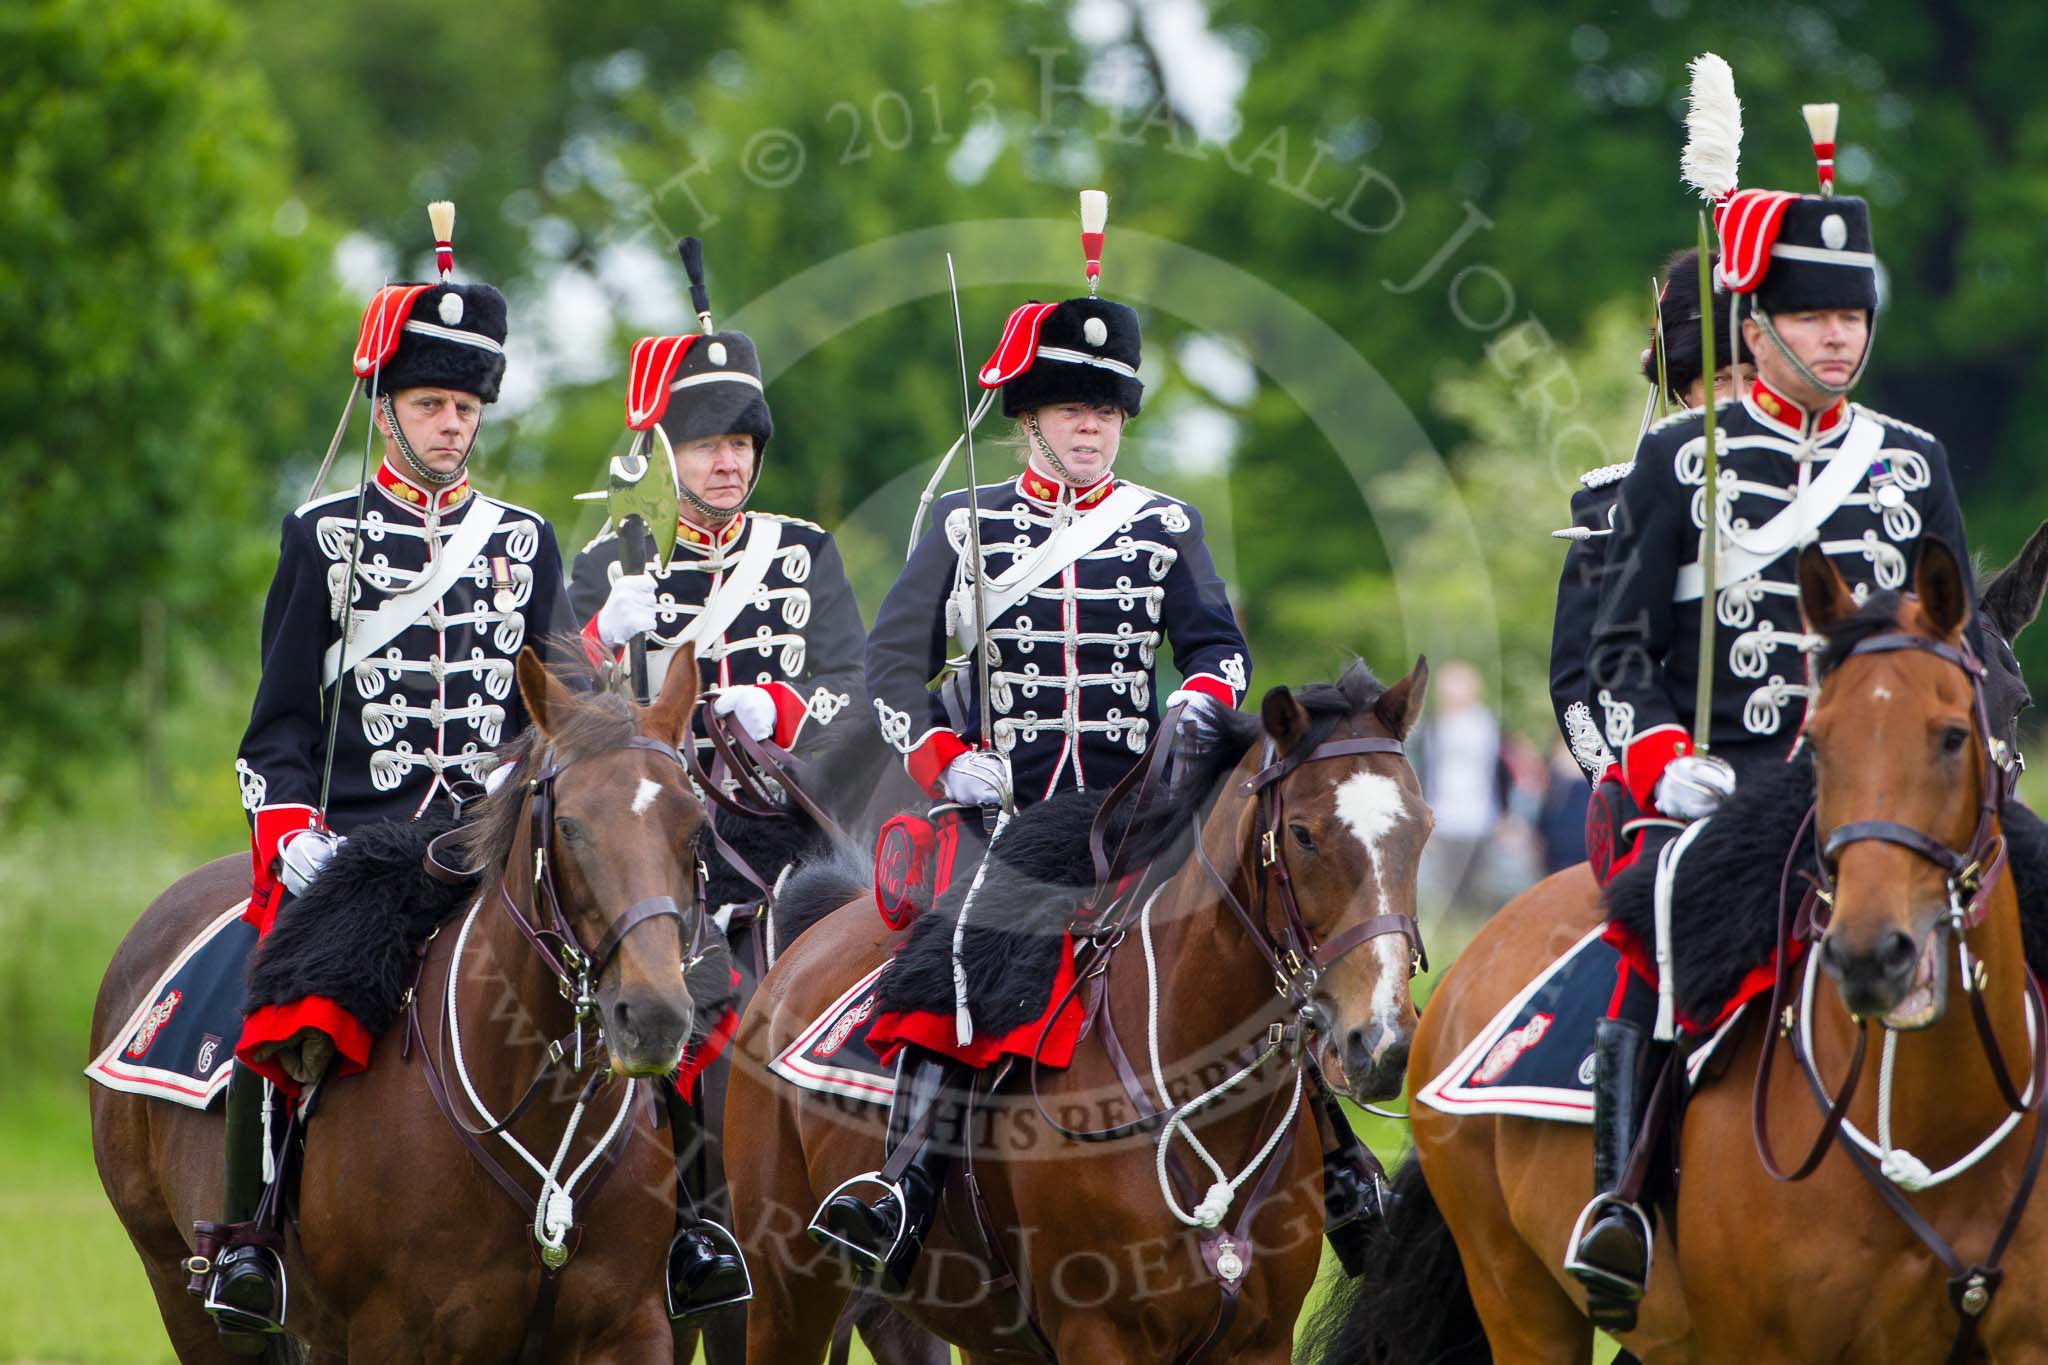 The Light Cavalry HAC Annual Review and Inspection 2013.
Windsor Great Park Review Ground,
Windsor,
Berkshire,
United Kingdom,
on 09 June 2013 at 13:35, image #450